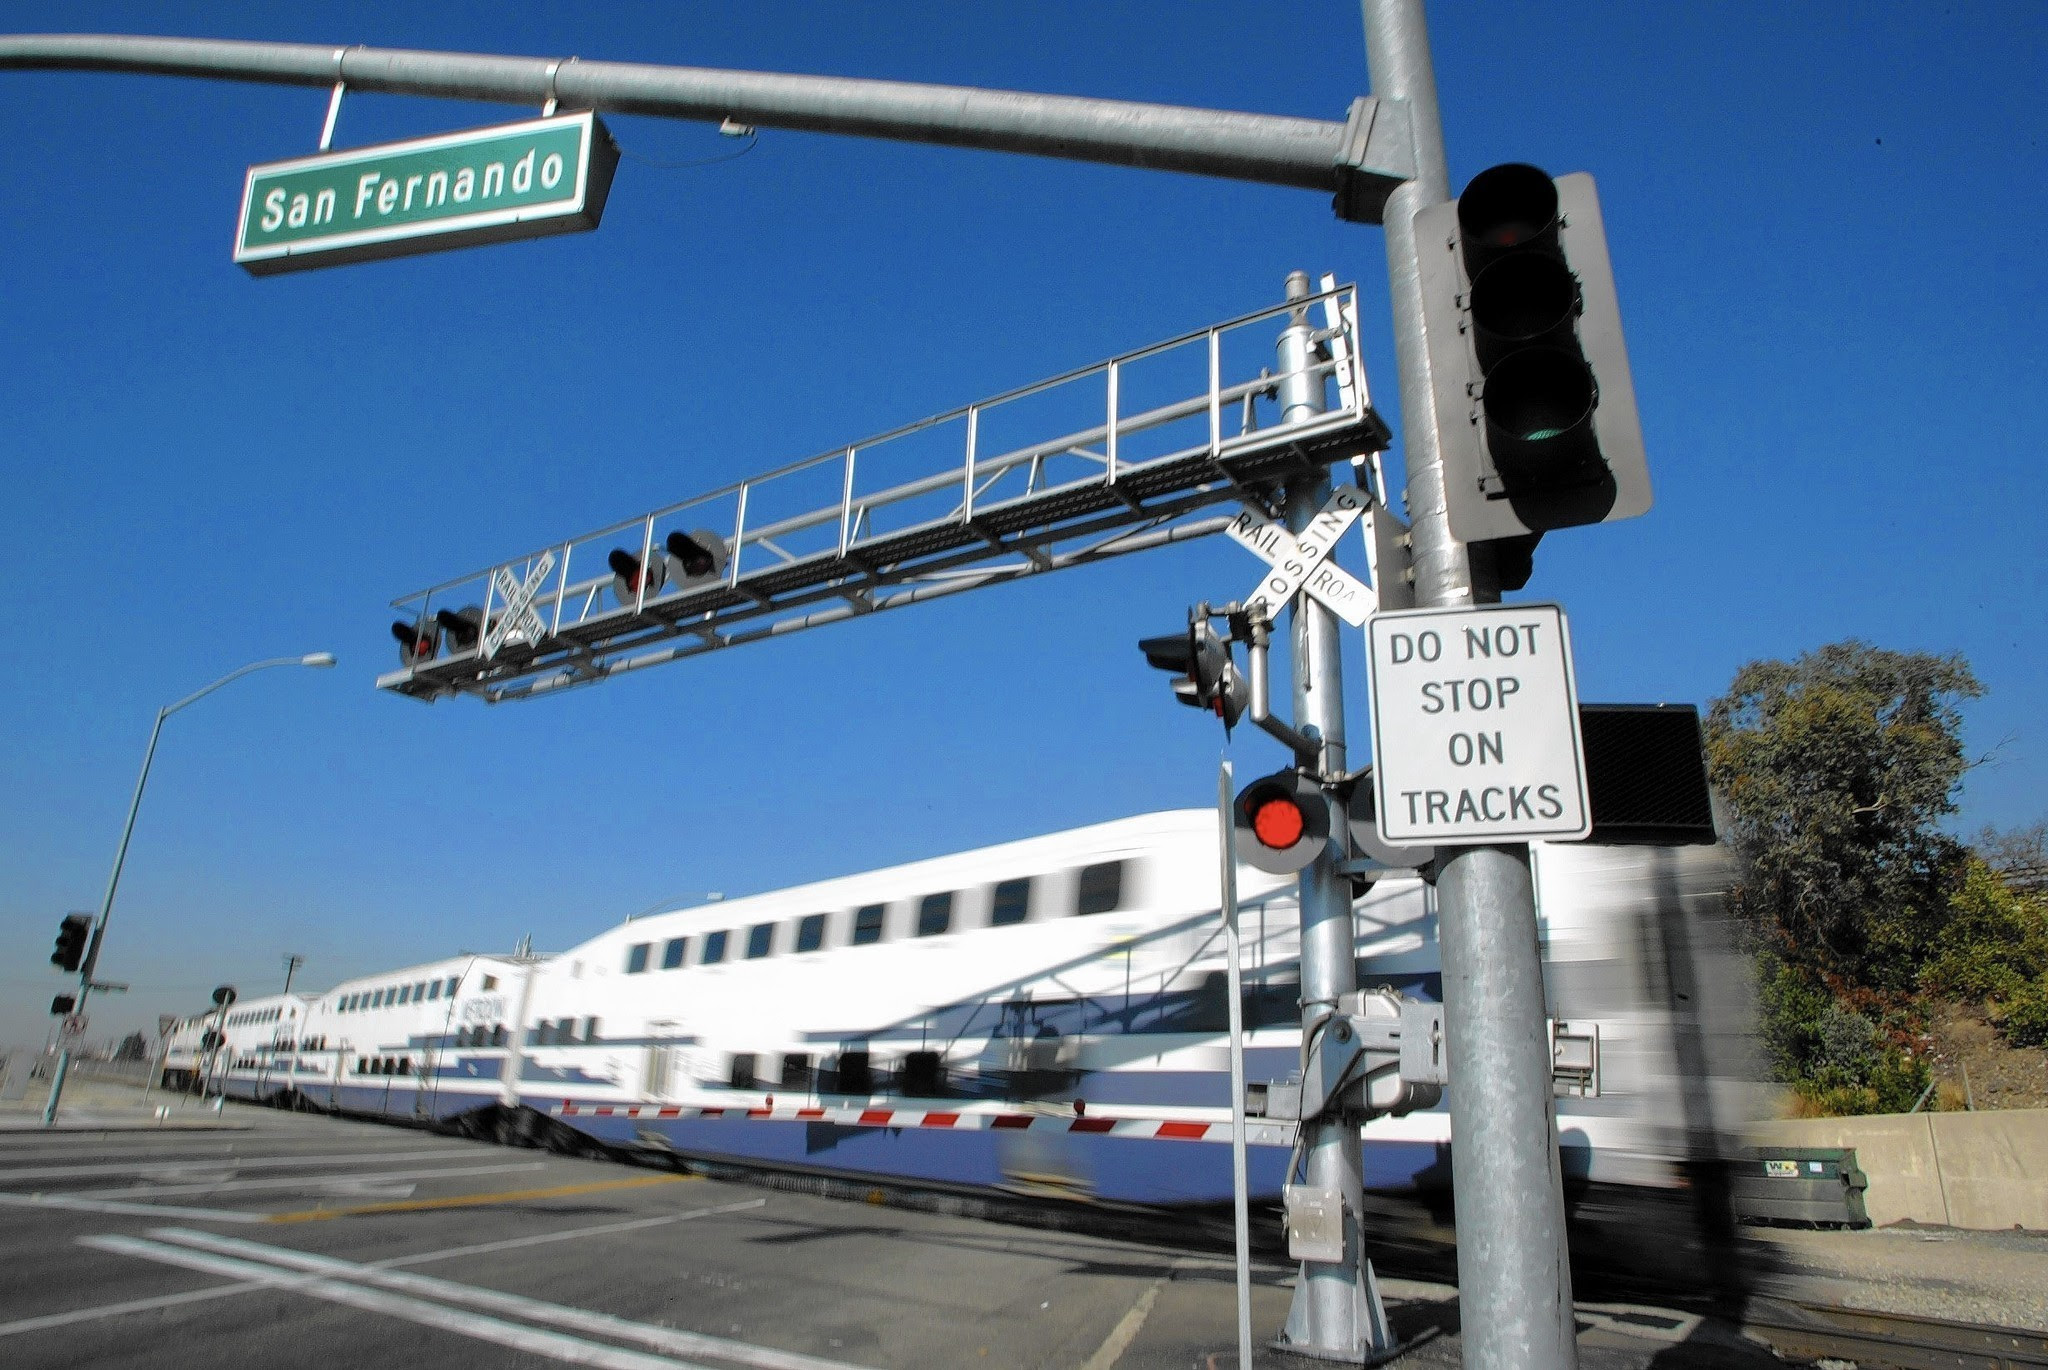 Bullet train's eventual link to L.A. rail system far from clear-cut